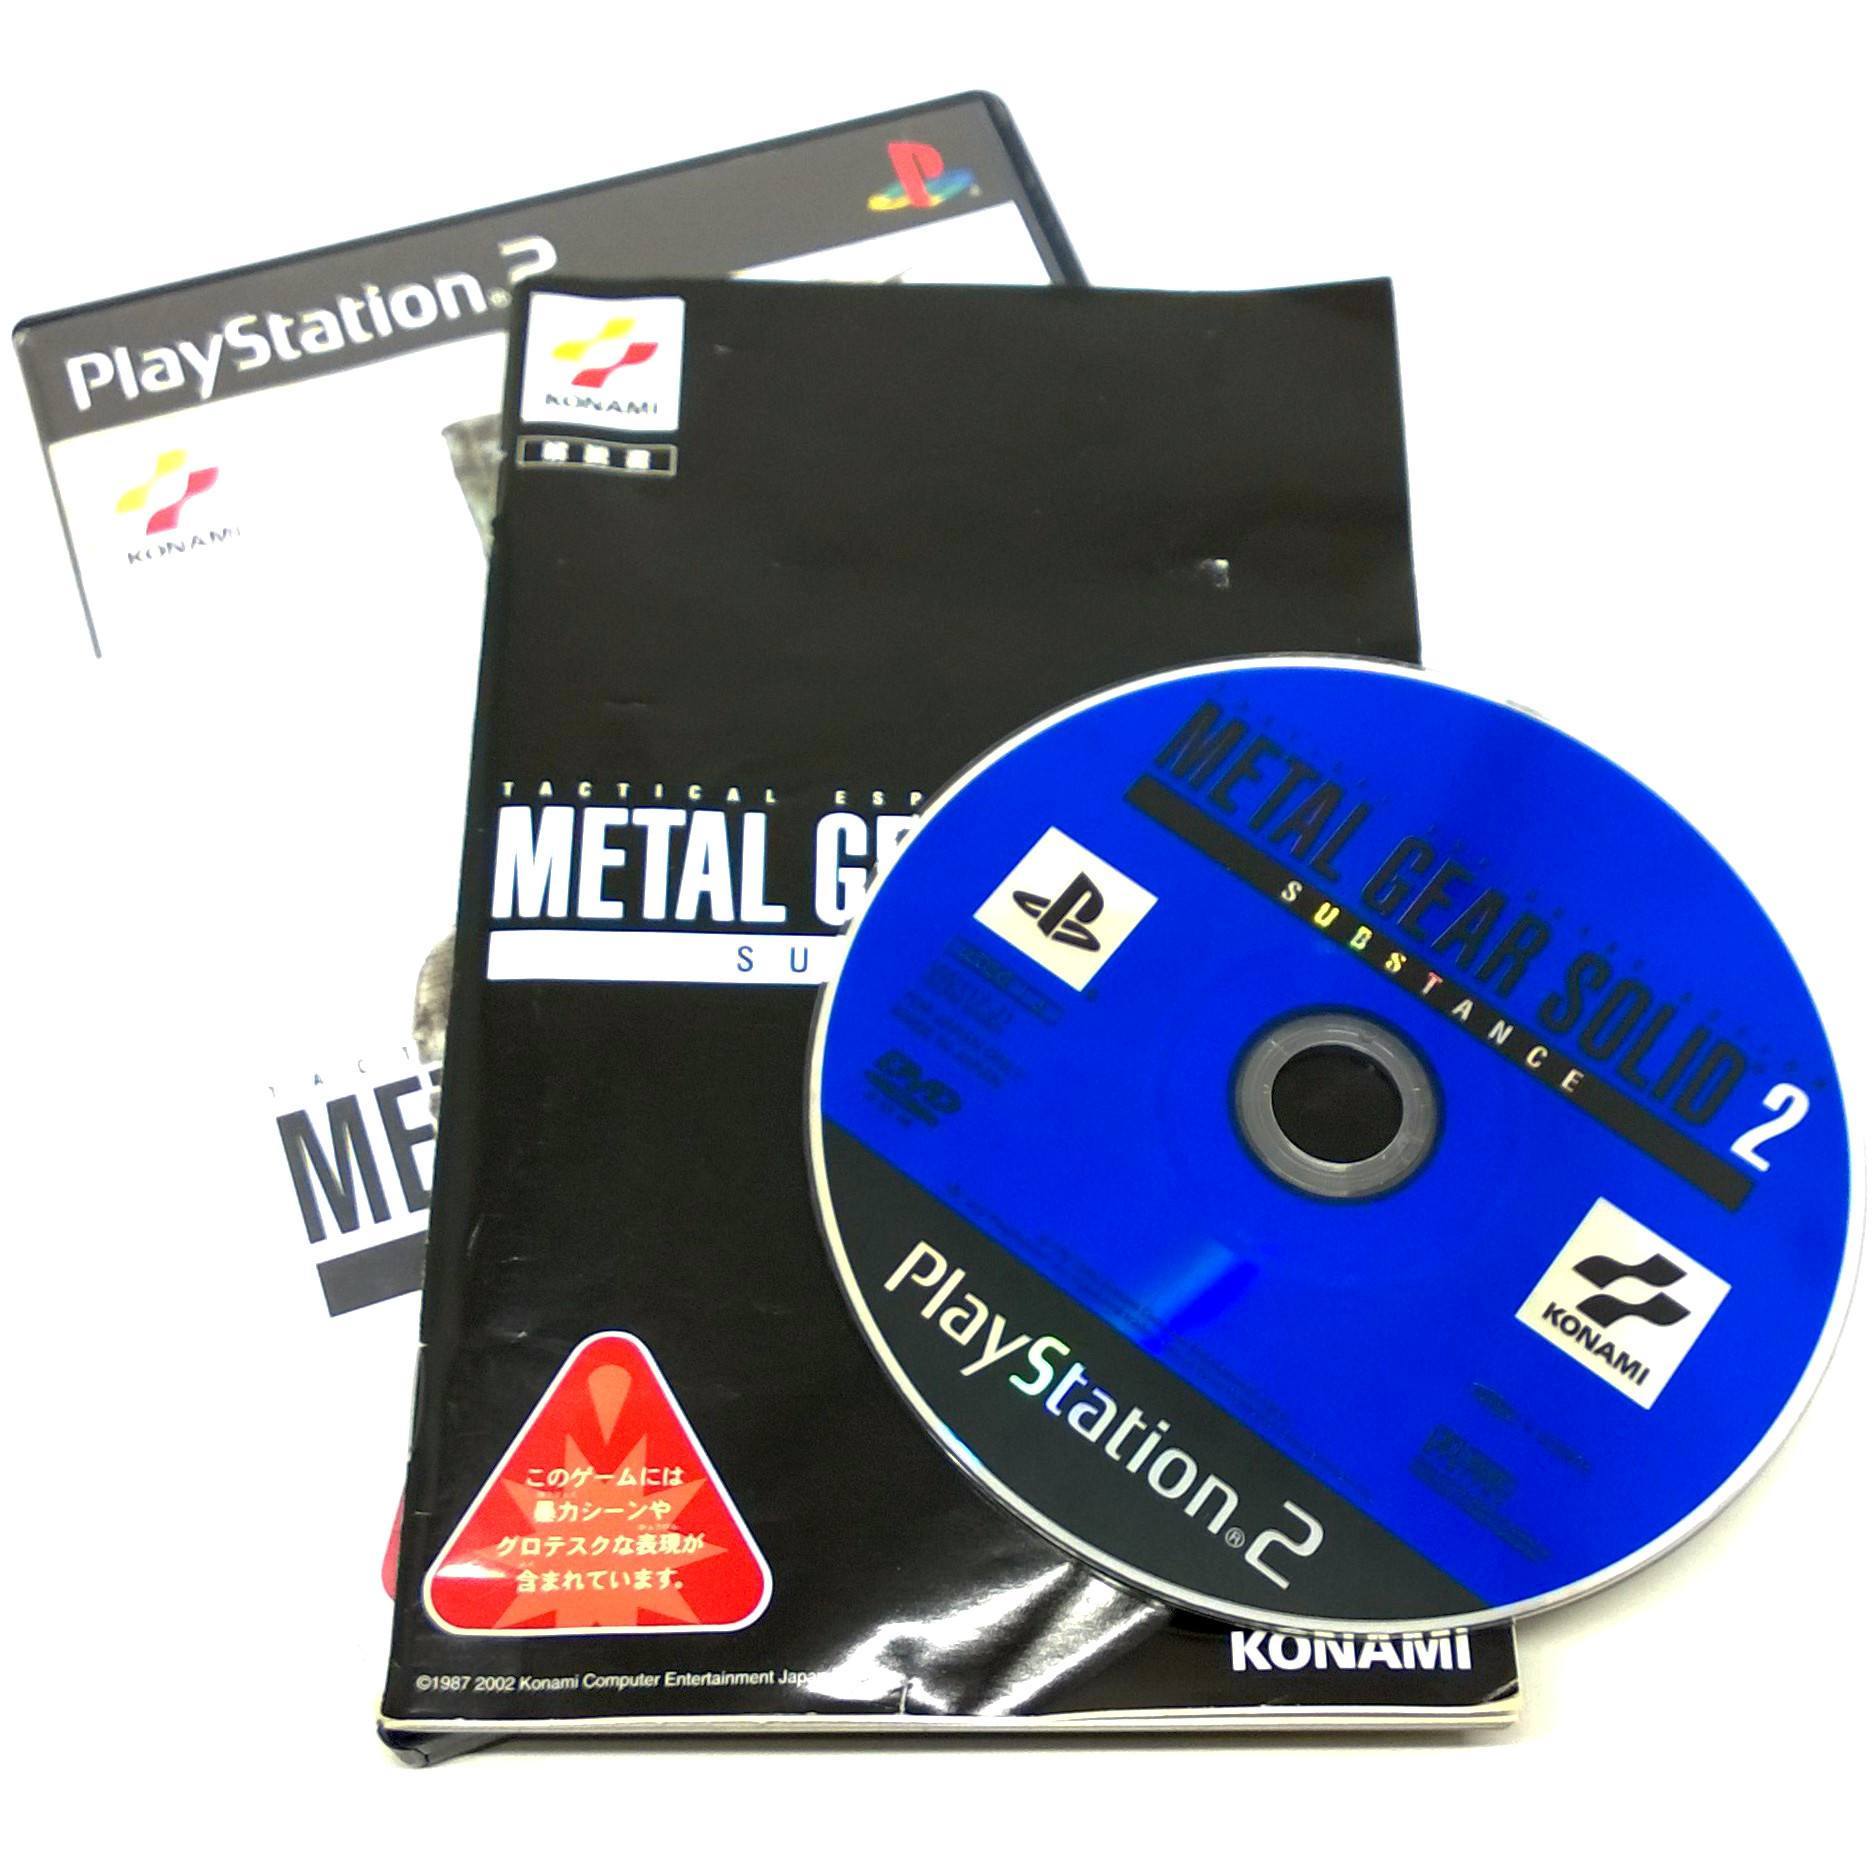 Metal Gear Solid 2: Substance for PlayStation 2 (import)